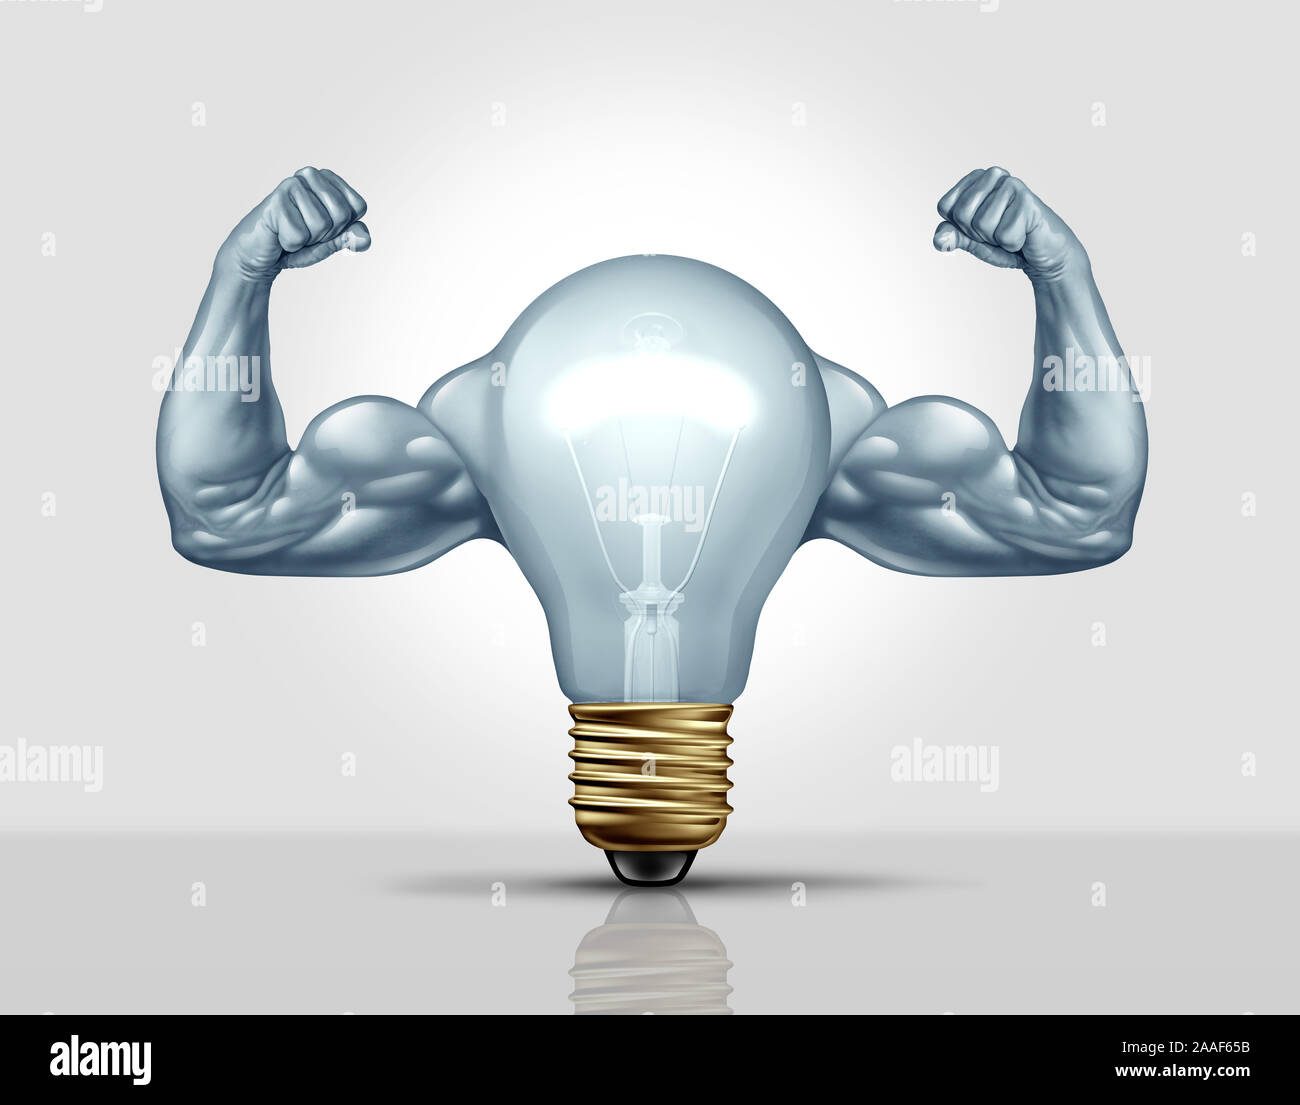 Powerful idea and strong creative ideas metaphor and business creativity strength as a light bulb or lightbulb with muscles as a symbol. Stock Photo